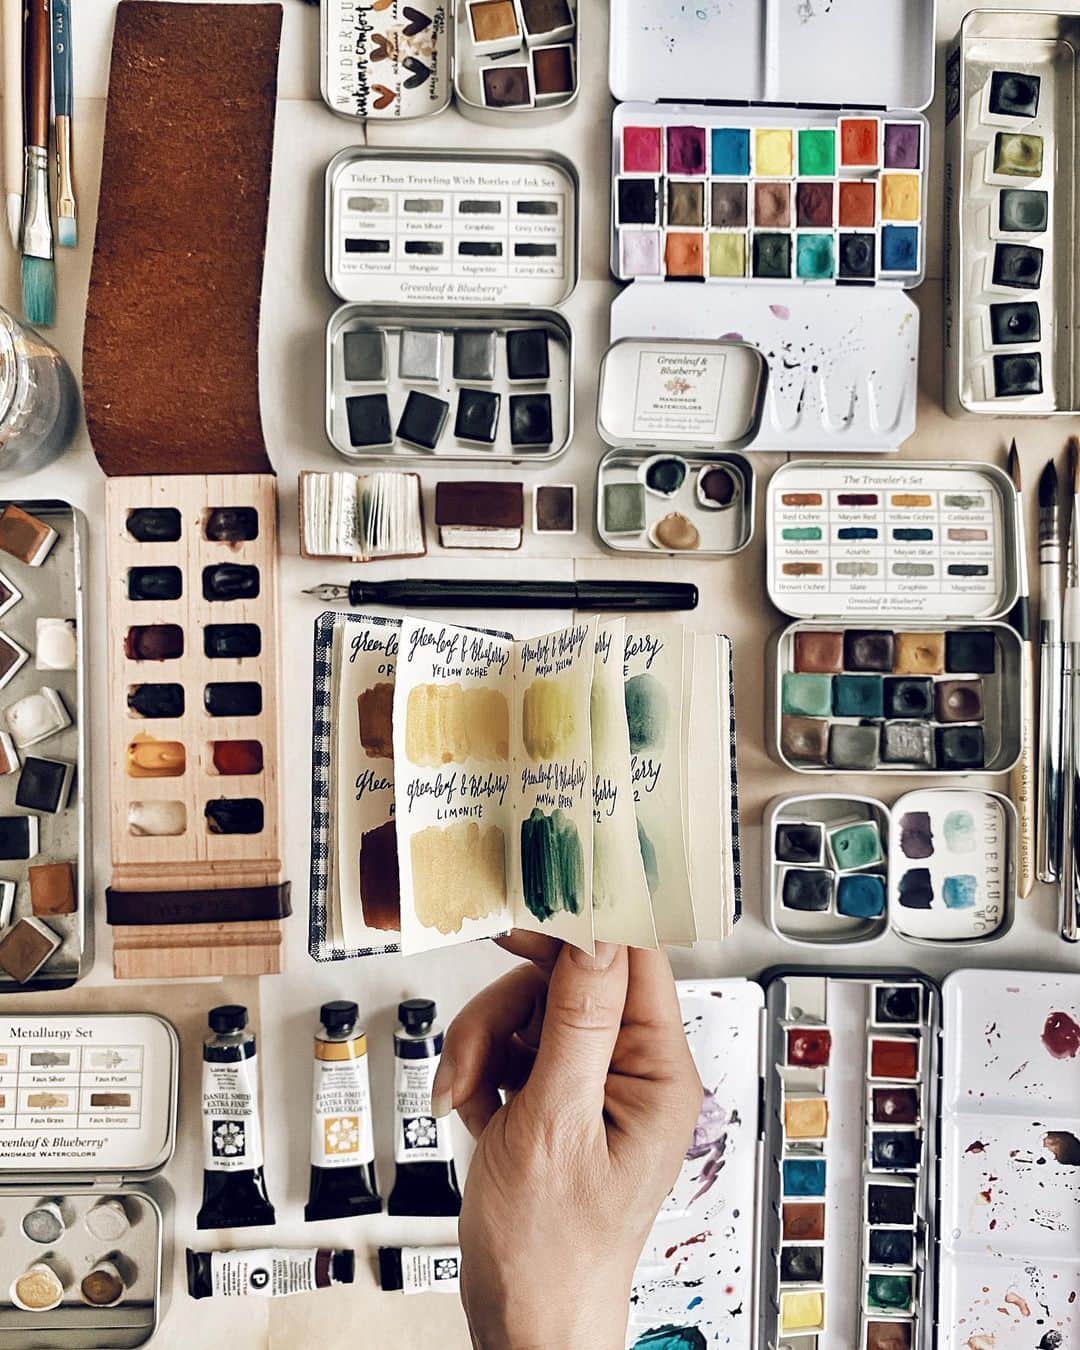 Catharine Mi-Sookさんのインスタグラム写真 - (Catharine Mi-SookInstagram)「My hobbies will forever entail an array of color, creative musings, scribblings, books, folklore and the insatiability of imaginative musings and dreams. Today I’m organizing my watercolors and as you can see I adore the personality of palettes and tins that keep these troves safely tucked. I realized that my little handmade booklet from the @pegandawl IGTV Bookbinding Tutorials did not hold enough pages halfway in swatching my paints and suddenly a 💡 went off and I realized that the @pegandawl Mini Harper Journal would make a most wonderful companion to house and categorize a growing number of watercolor swatches. I also found the perfect use for their teeny tiny Miniature Sketchbook - a swatch booklet to fit inside a tin palette. And then the final crescendo upon discovering that a palette, the Harper journal, a beloved sketch pen and paint brush with room to spare could all neatly tuck in the Scribbler Pouch. It’s the little things. I have found that this swatch journal is a most peaceful way to wind down from a hectic day helping me slow my rhythms into a needed calm. I will be spending a good portion of my weekend down time happily filling these pages. And on that, happy Friday to all! I hope the weekend brings much rejuvenation and rest. . . . Today’s palette: Mini Harper Journal, Miniature Artist Sketchbook, Iris Painter Palette & Scribbler Pouch @pegandawl. Model 65 fountain pen @franklinchristoph (a rare sighting in a beautiful Emerald on the site). Waterproof DeAtrementis Document ink @justvanness. Handmade Watercolors @greenleafblue @wanderlustwc @caseformaking. Paints in my Iris Palette @danielsmithartistsmaterials. And one of my first artist grade sets @sennelier1887. . . . . #watercolorswatches #watercolours #watercolors #pegandawl #leatherjournal #leatherjournals #handmadebook #bookbinding #handmadejournal #franklinchristoph #fountainpens #sketchpen #flatlays #flatlaylove #handmadewatercolors #greenleafblueberry #caseformaking #wanderlustwc #sennelier #danielsmithwatercolors #artsupplies #handsinframe #creativespace #artjournals #watercolorpalette #watercolorpaint #stationeryaddict」7月25日 1時34分 - catharinemisook